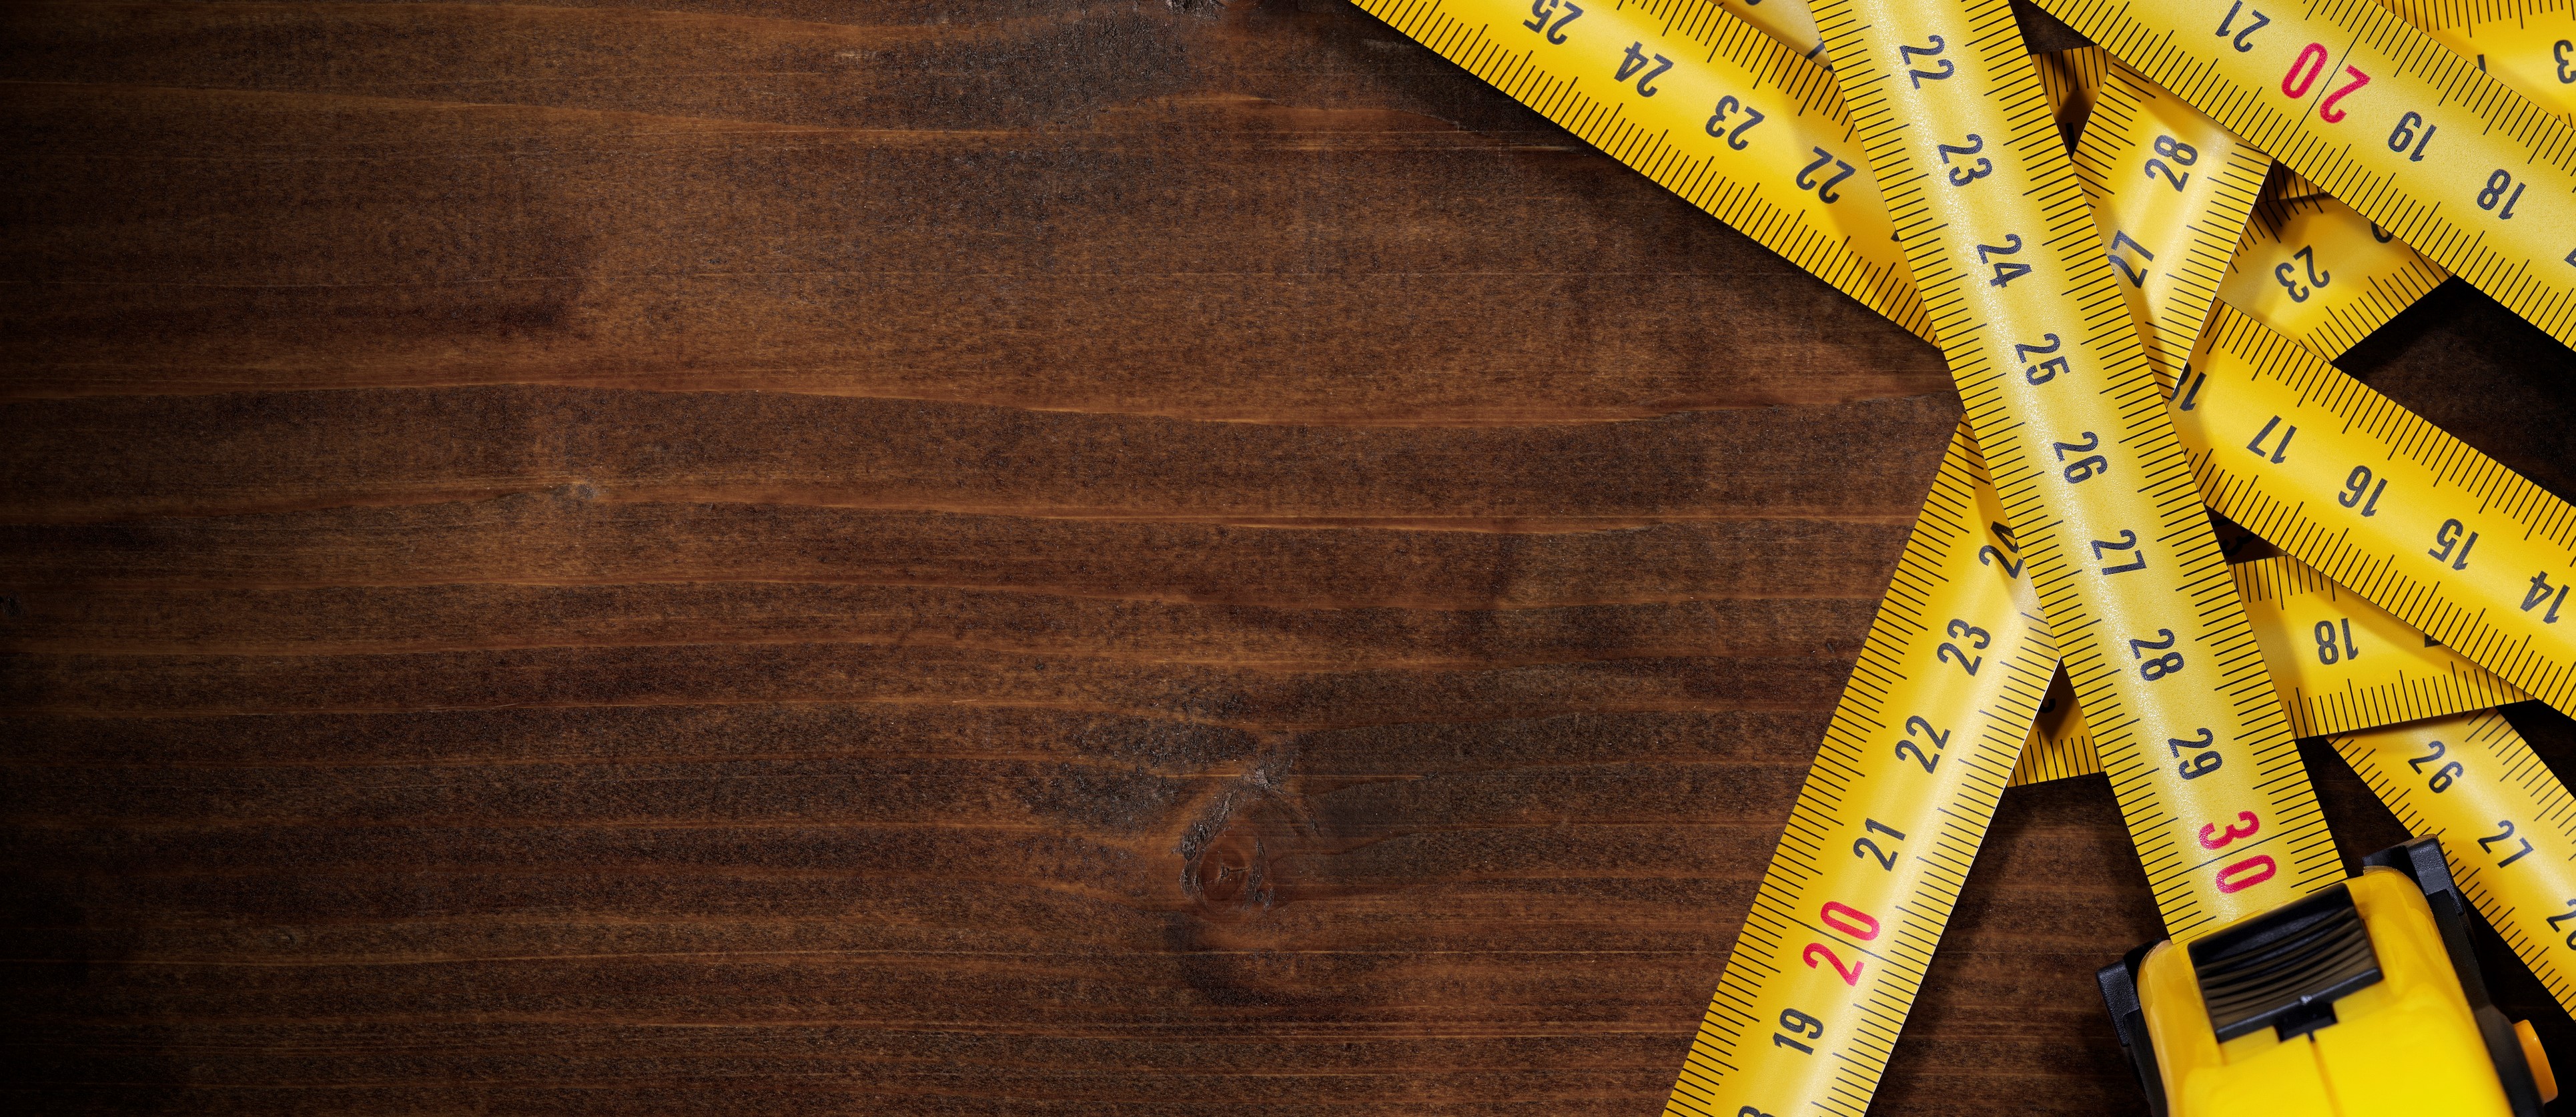 Tape Measures on Brown Wooden Background